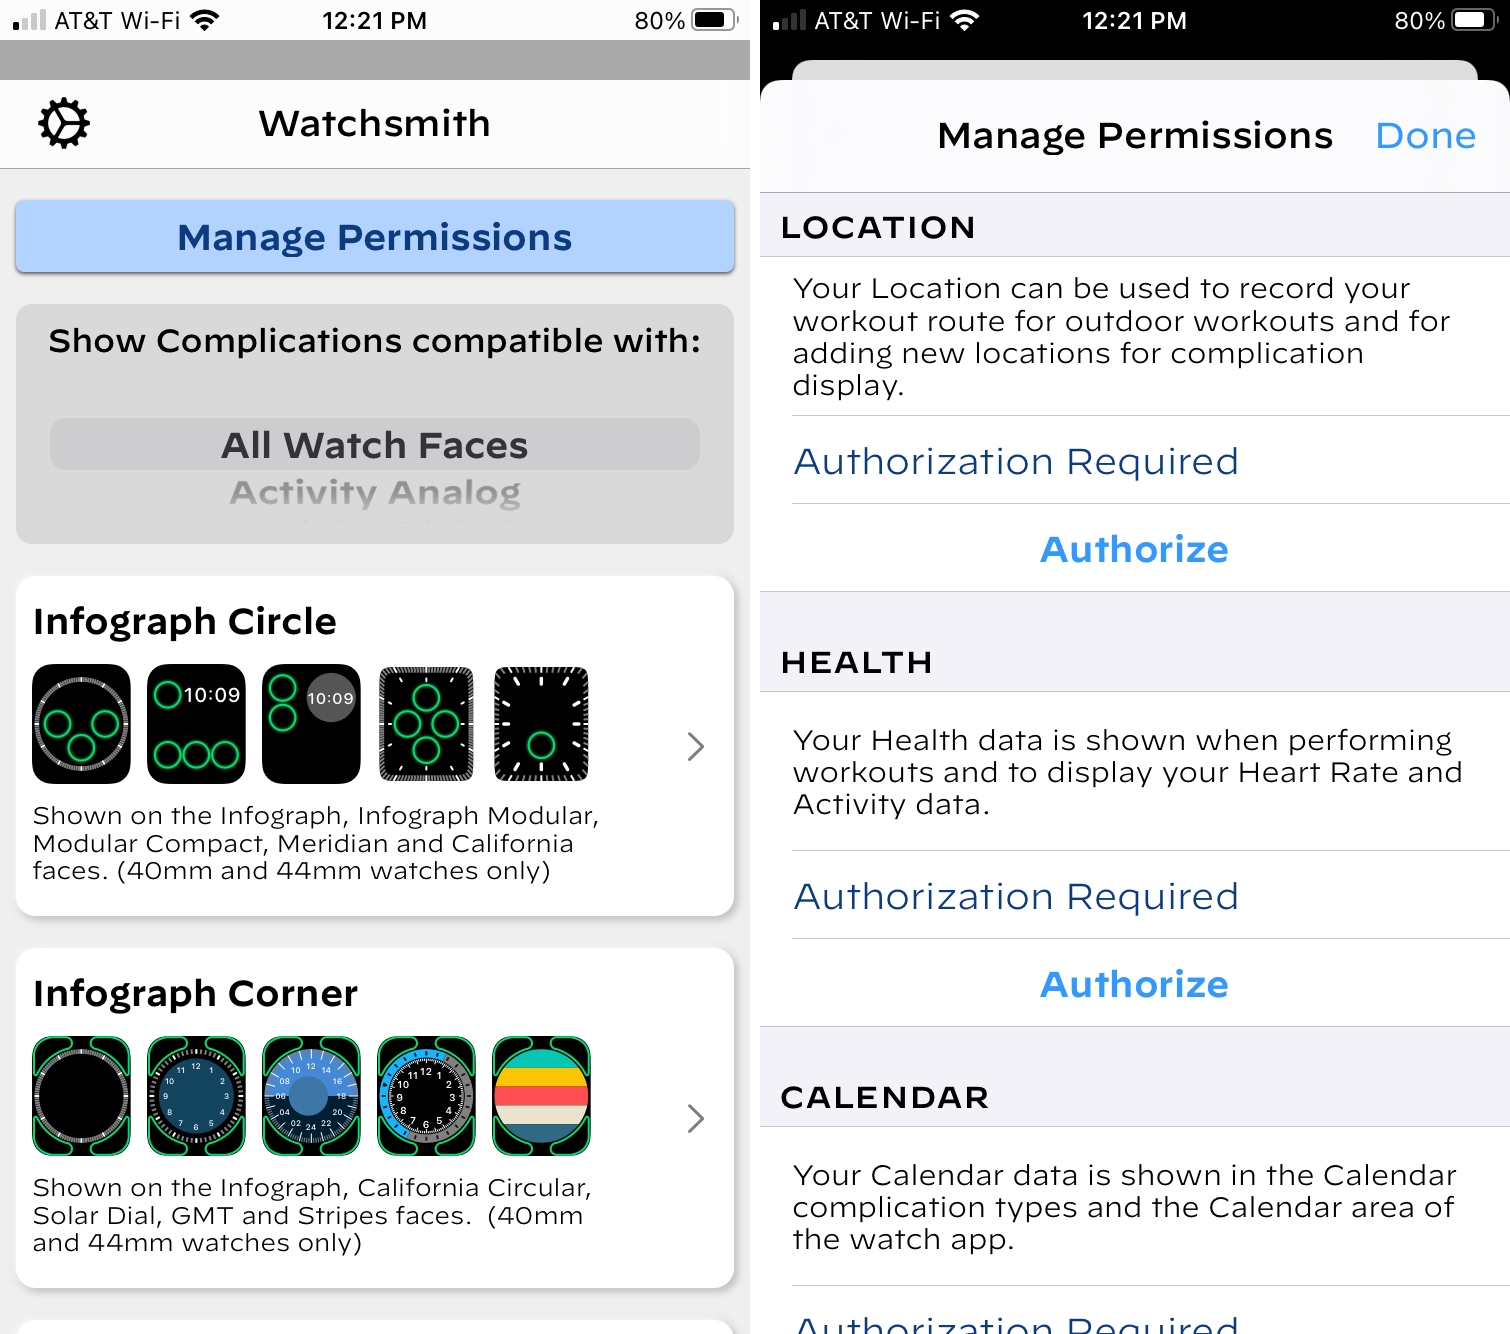 Watchsmith Manage Permissions